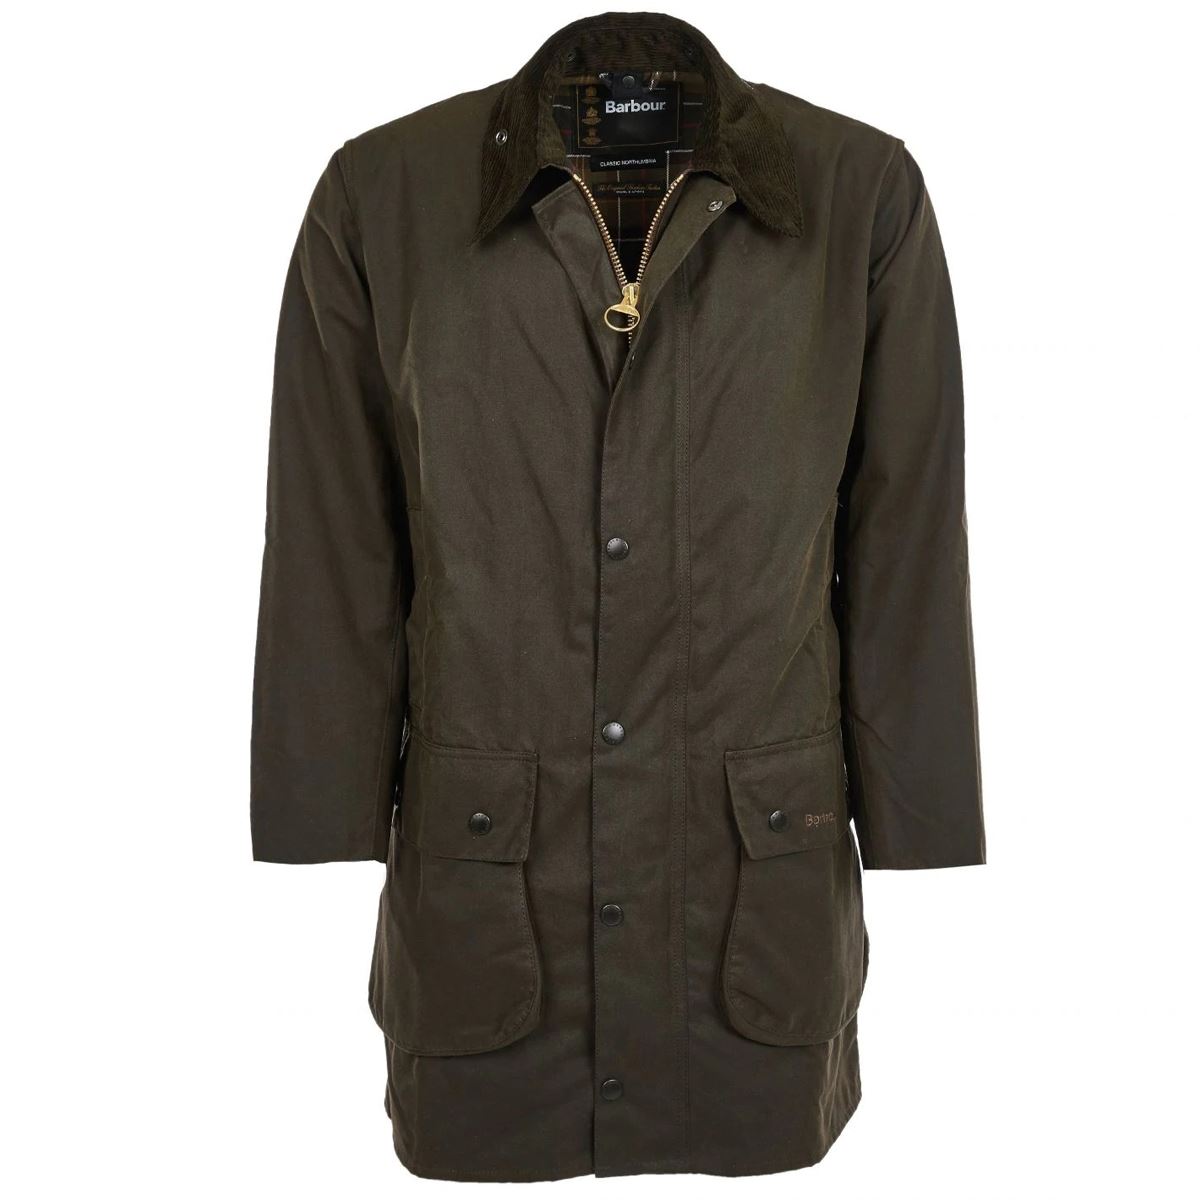 What advantages does the construction of the Barbour Northumbria Wax Jacket offer?